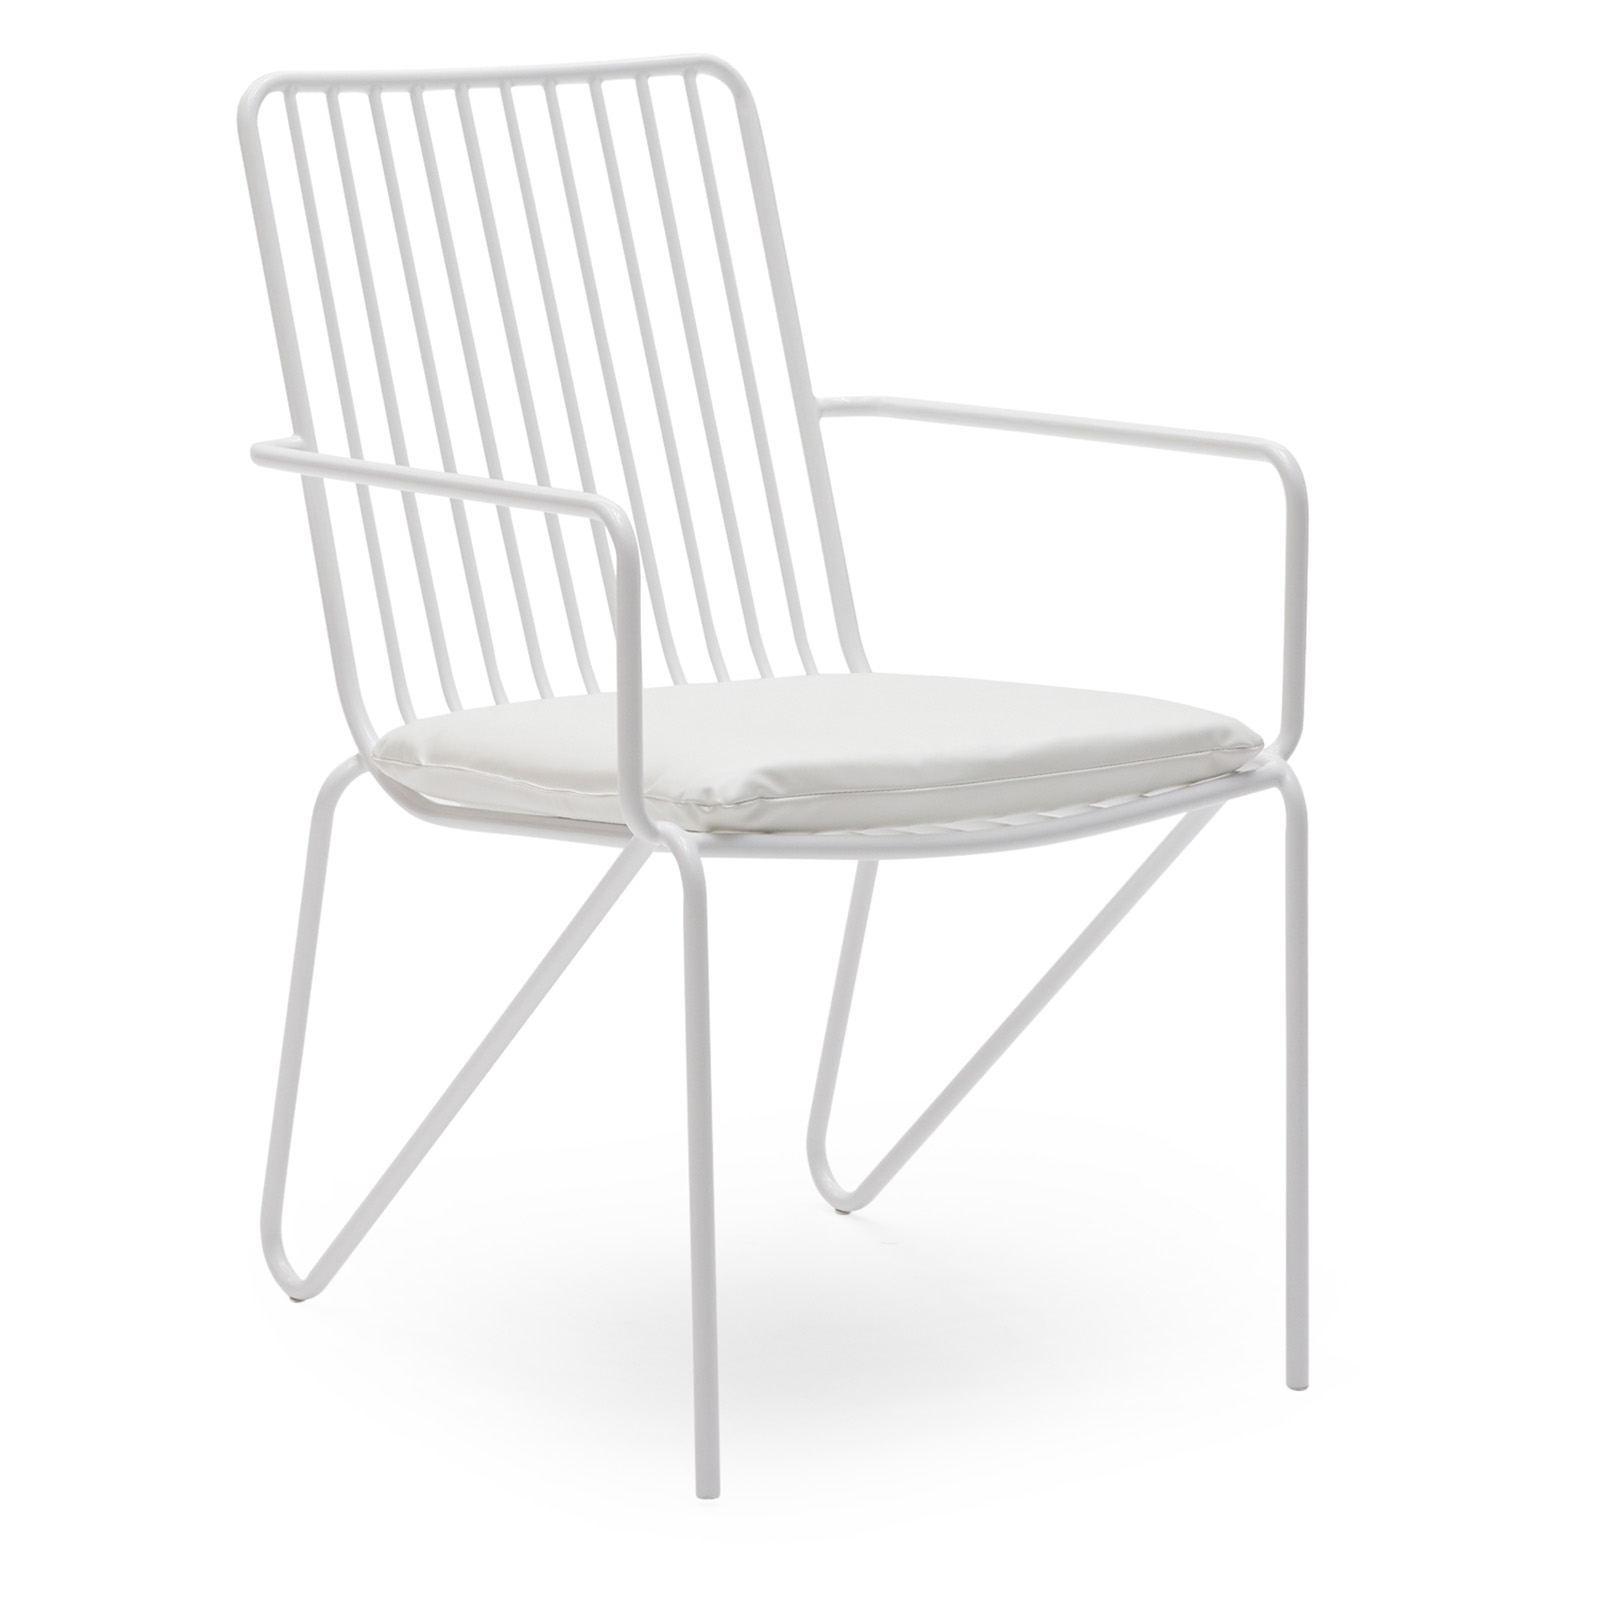 MoDRN Industrial Wrought Iron Stacking Dining Chair - Set of 2 - White (Chairs Only) - image 3 of 9